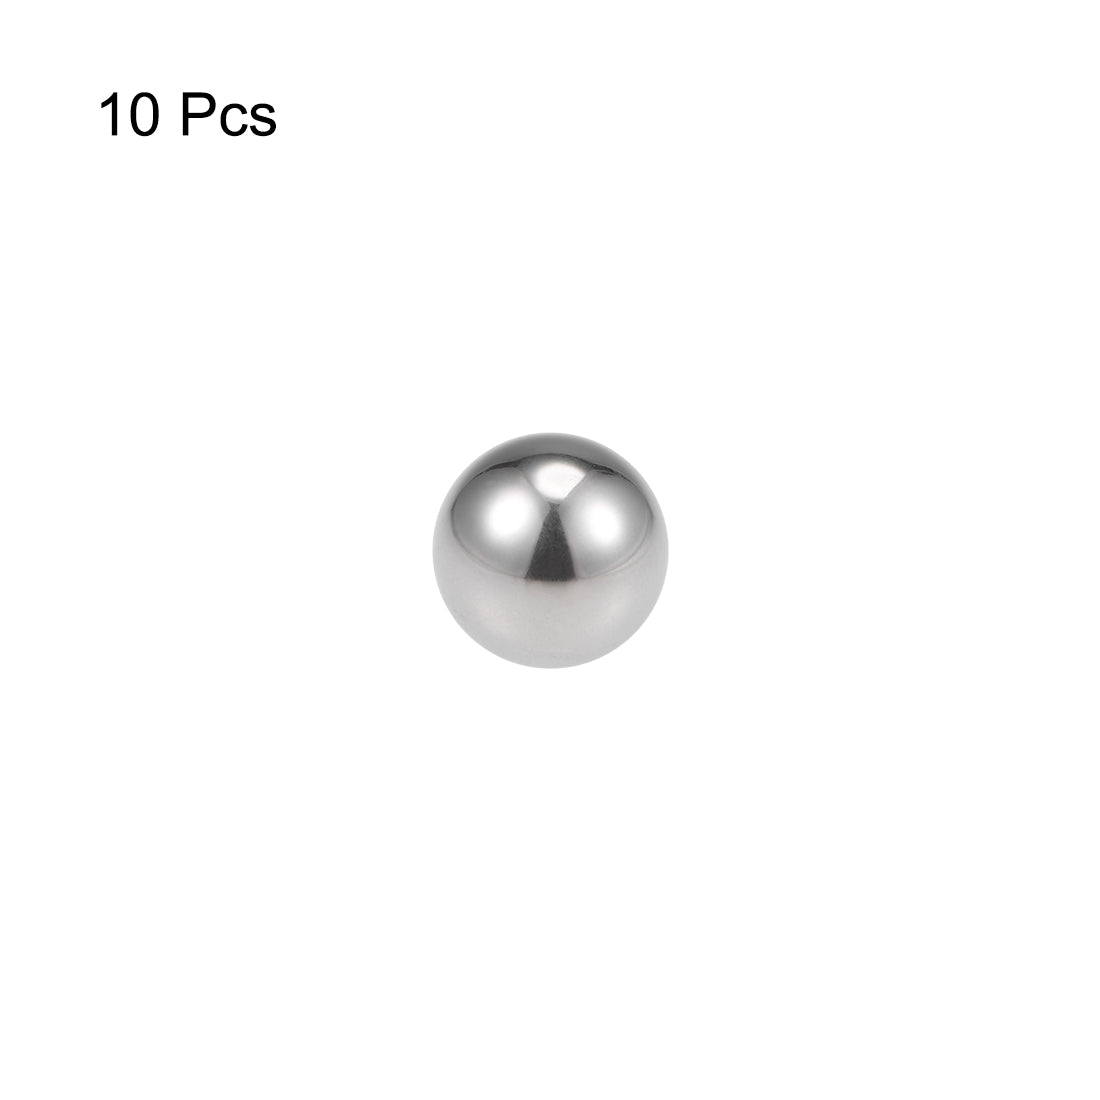 Uxcell Uxcell 3/8" Bearing Balls 440C Stainless Steel G25 Precision Balls 10pcs